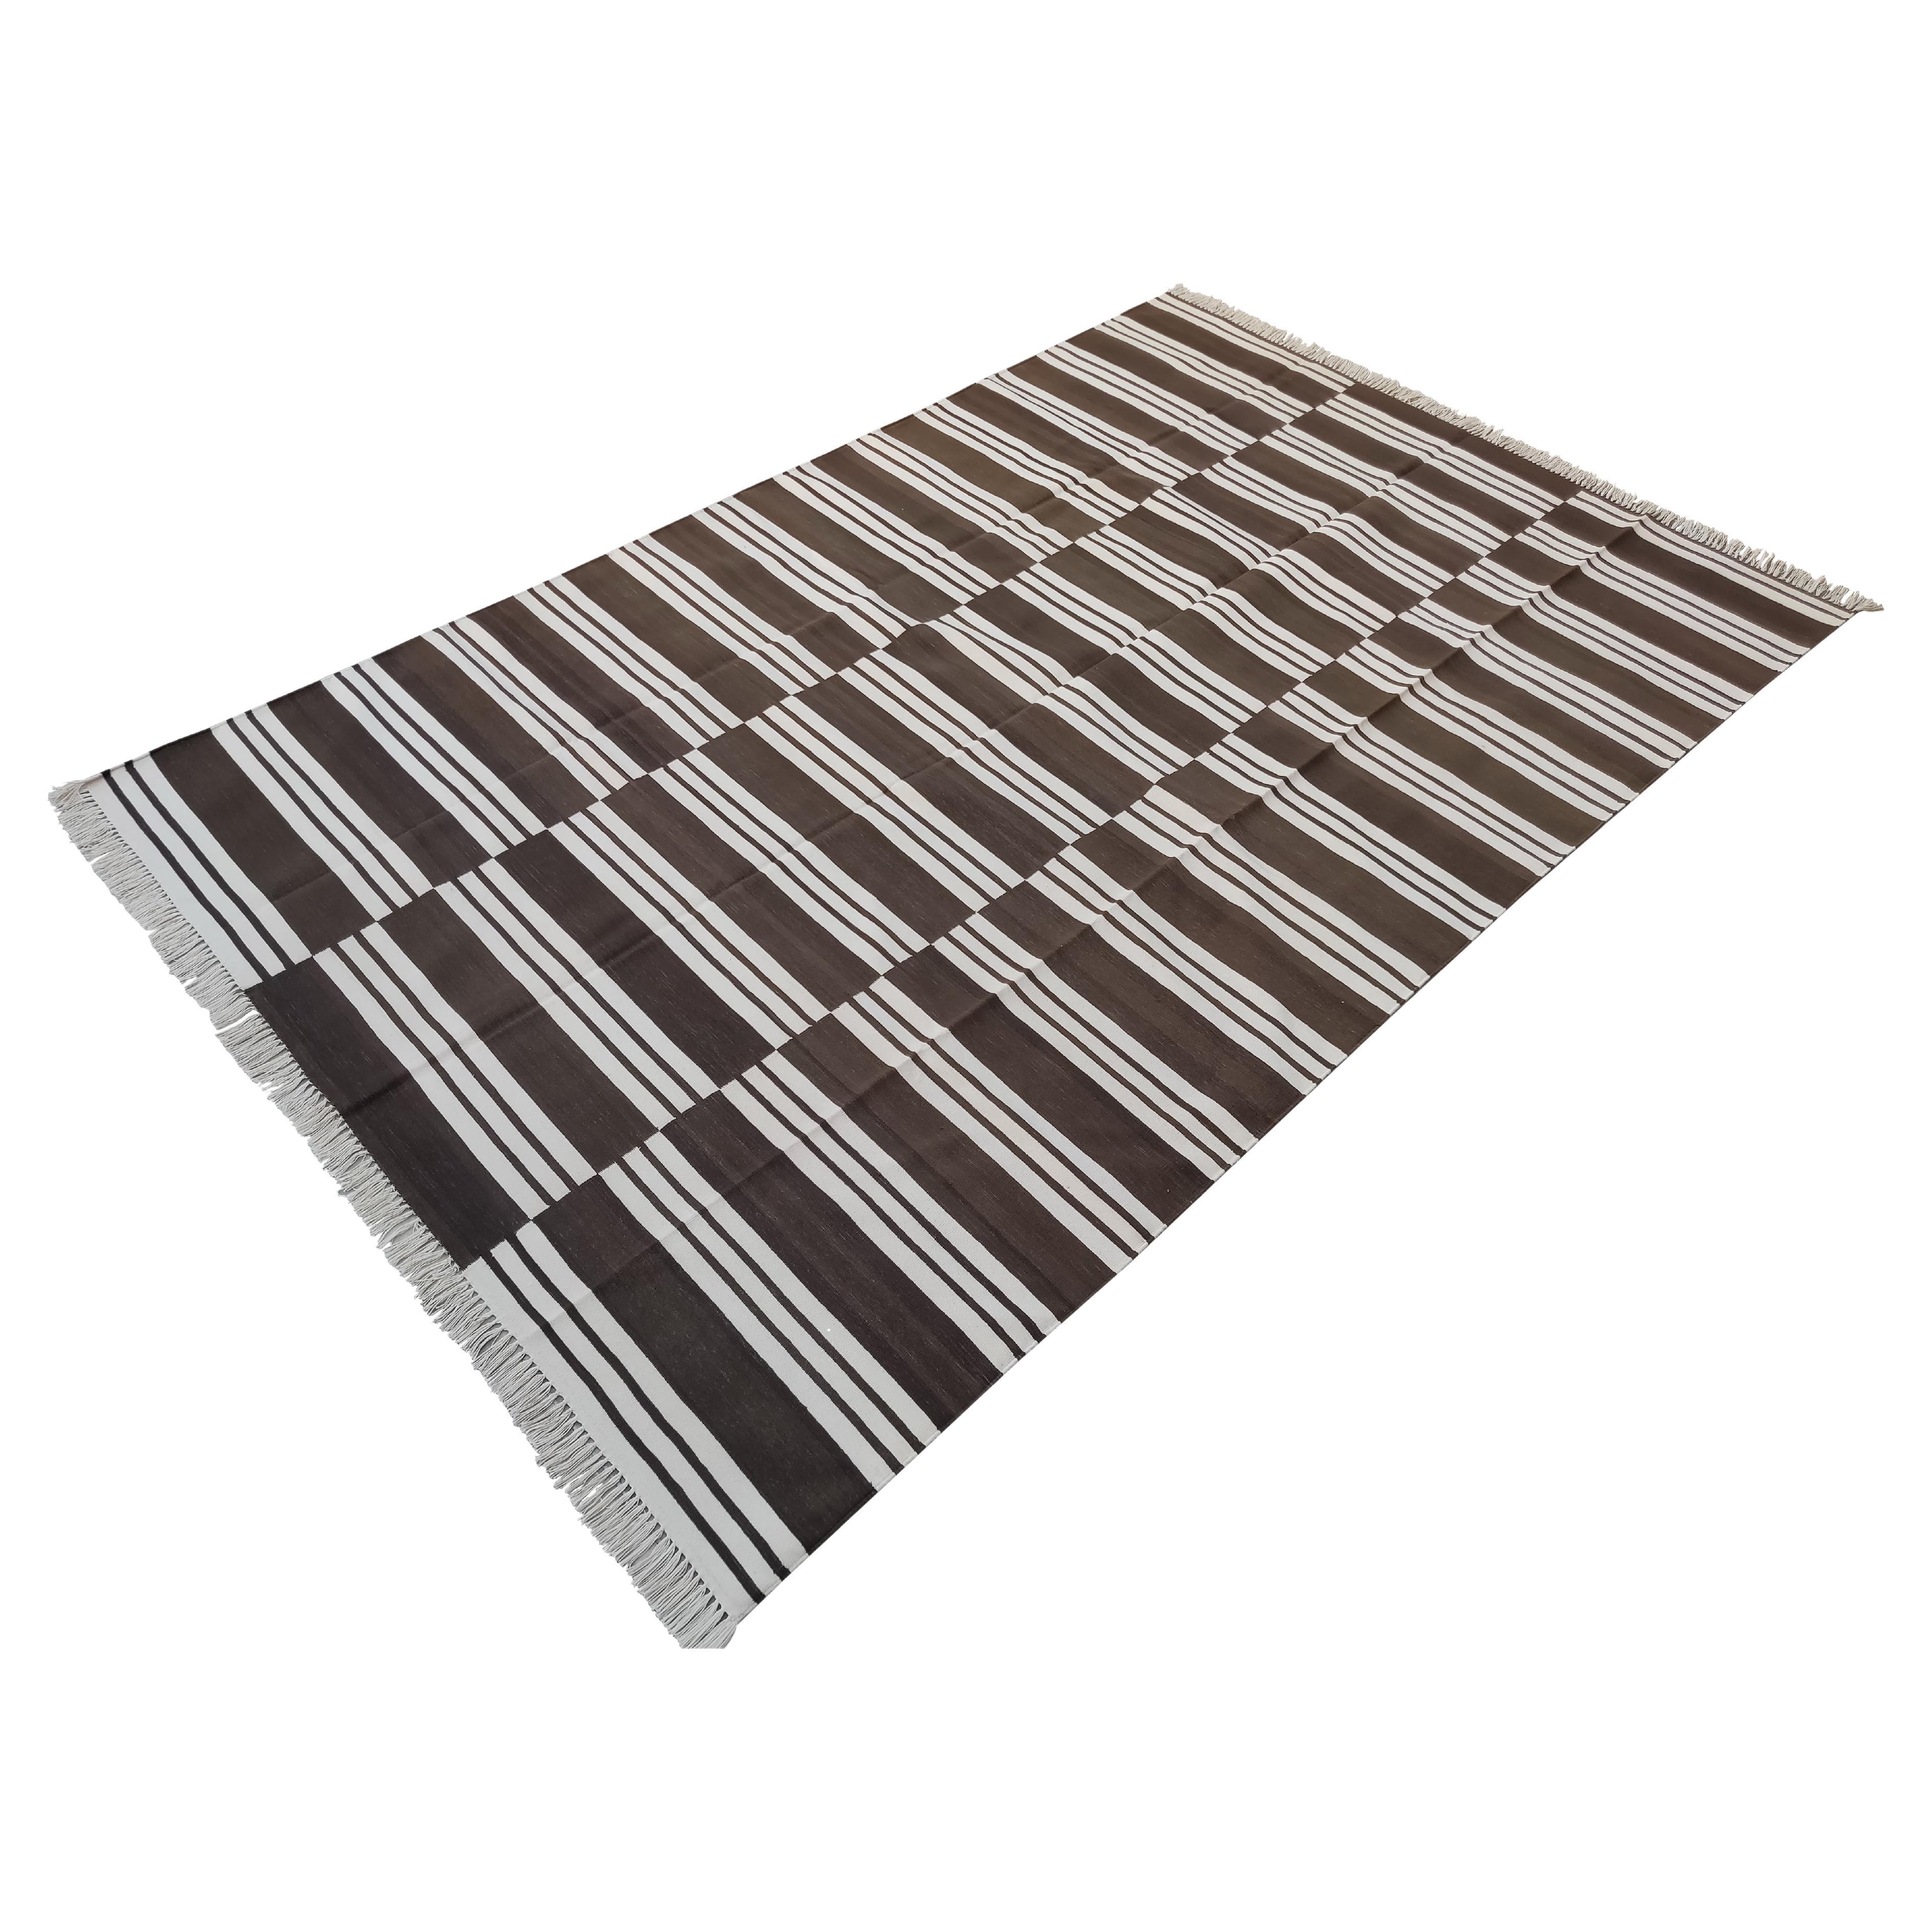 Handmade Cotton Area Flat Weave Rug, 6x9 Brown And White Striped Indian Dhurrie